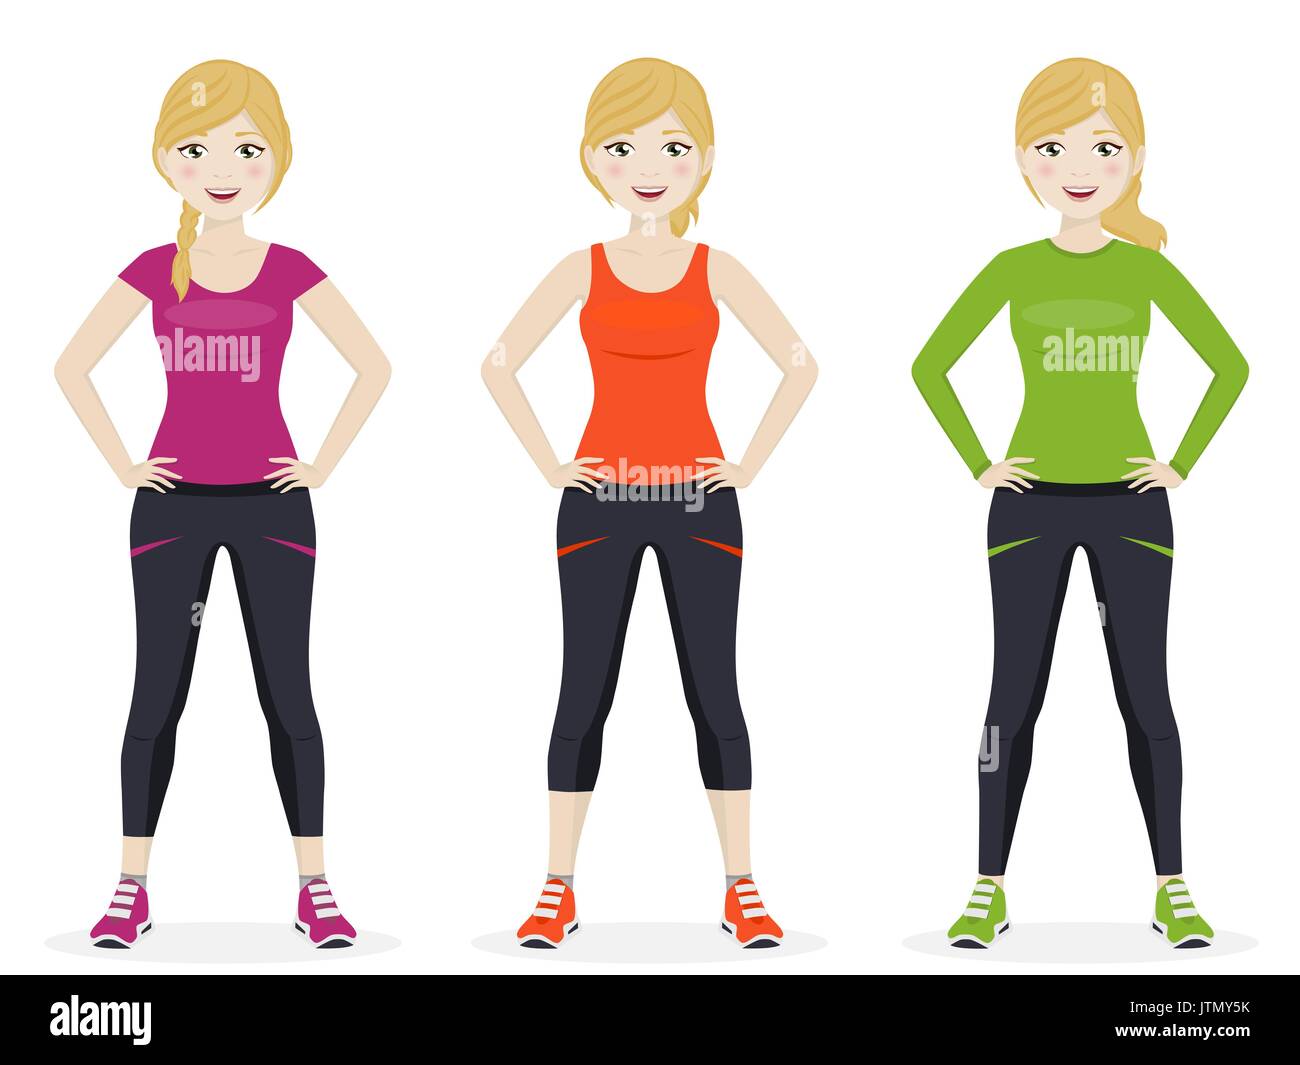 Woman exercise clothes Stock Vector Images - Alamy